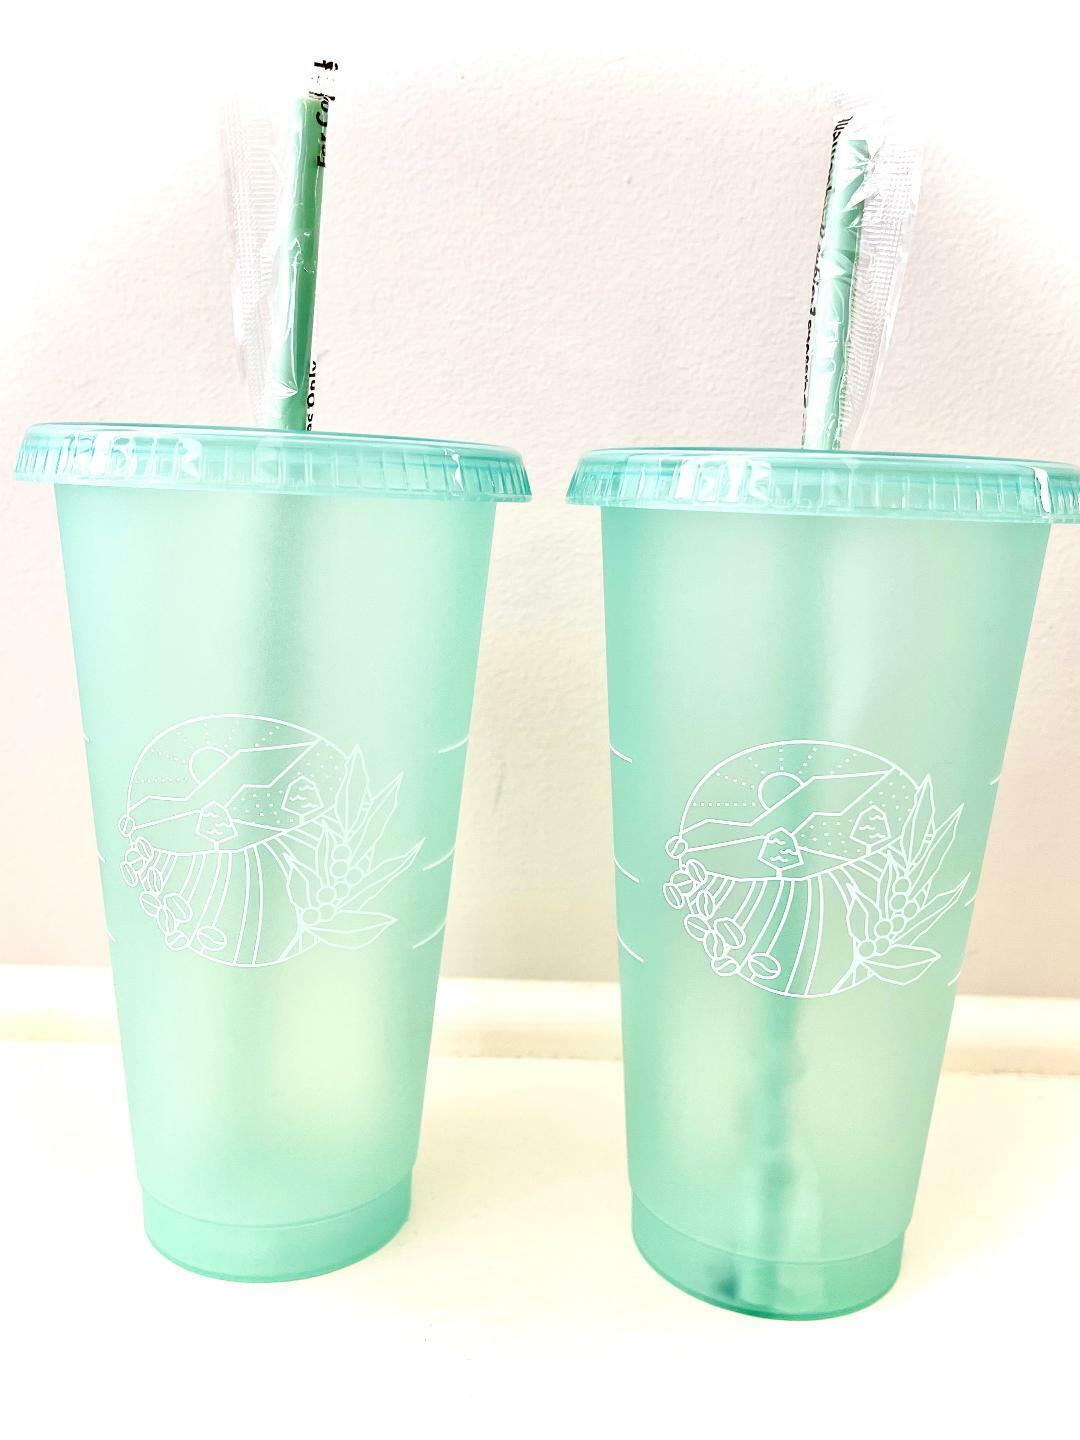 BRAND NEW - Starbucks - Spring 2021 / Earth Day - Cold Cup - Venti - Set of 2